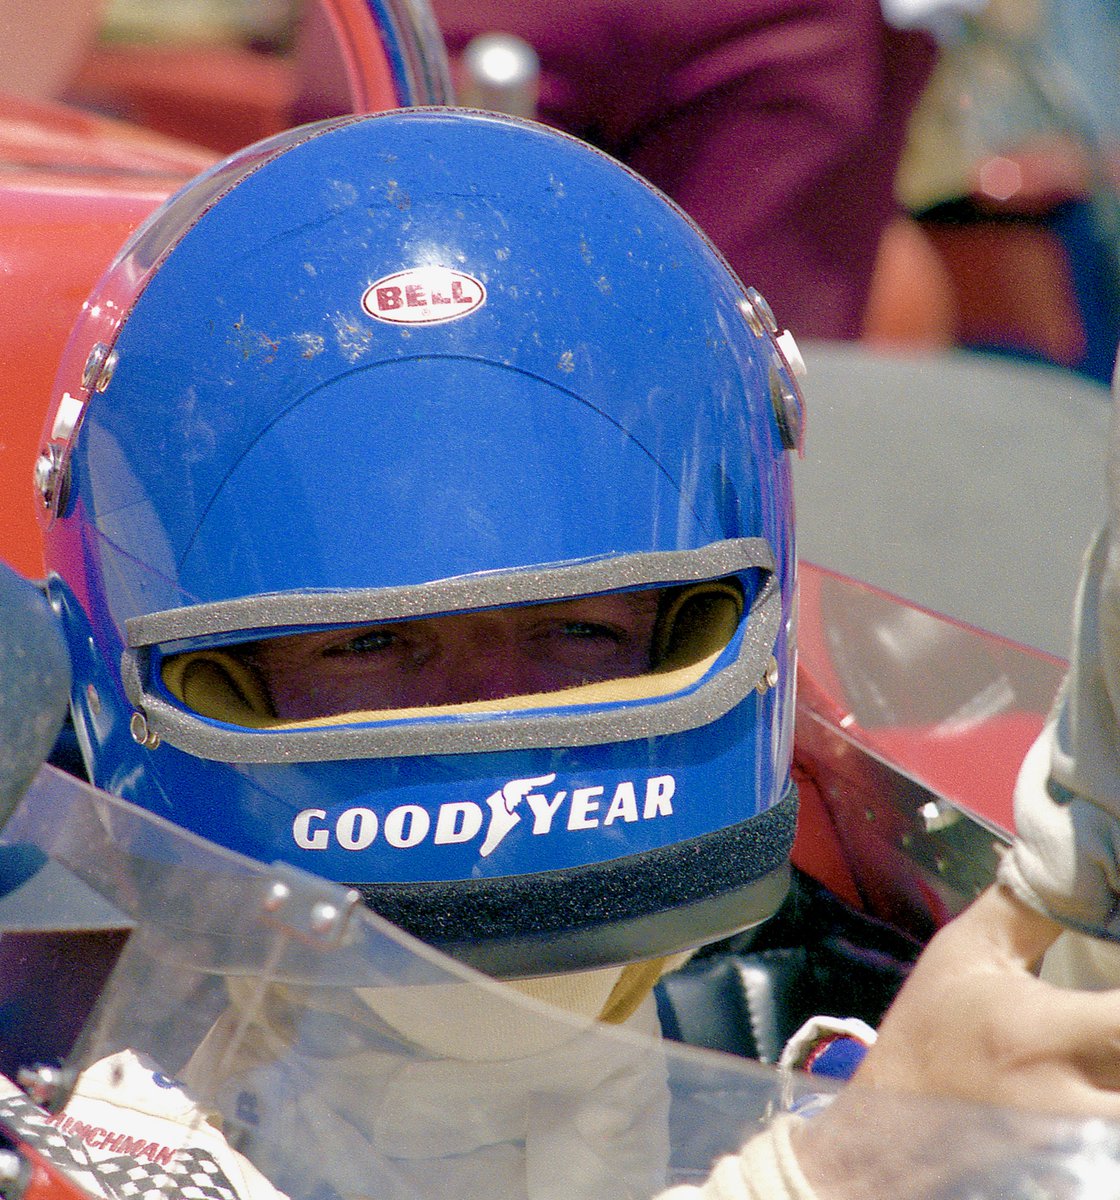 Who needs a fancy helmet design to go fast? All you need to do is protect your head and have a visor opening just big enough to see out of!!! Our pal, 1973 & 1982 #Indy500 winner Gordon Johncock....🏁🏆🏁🏆🇺🇸